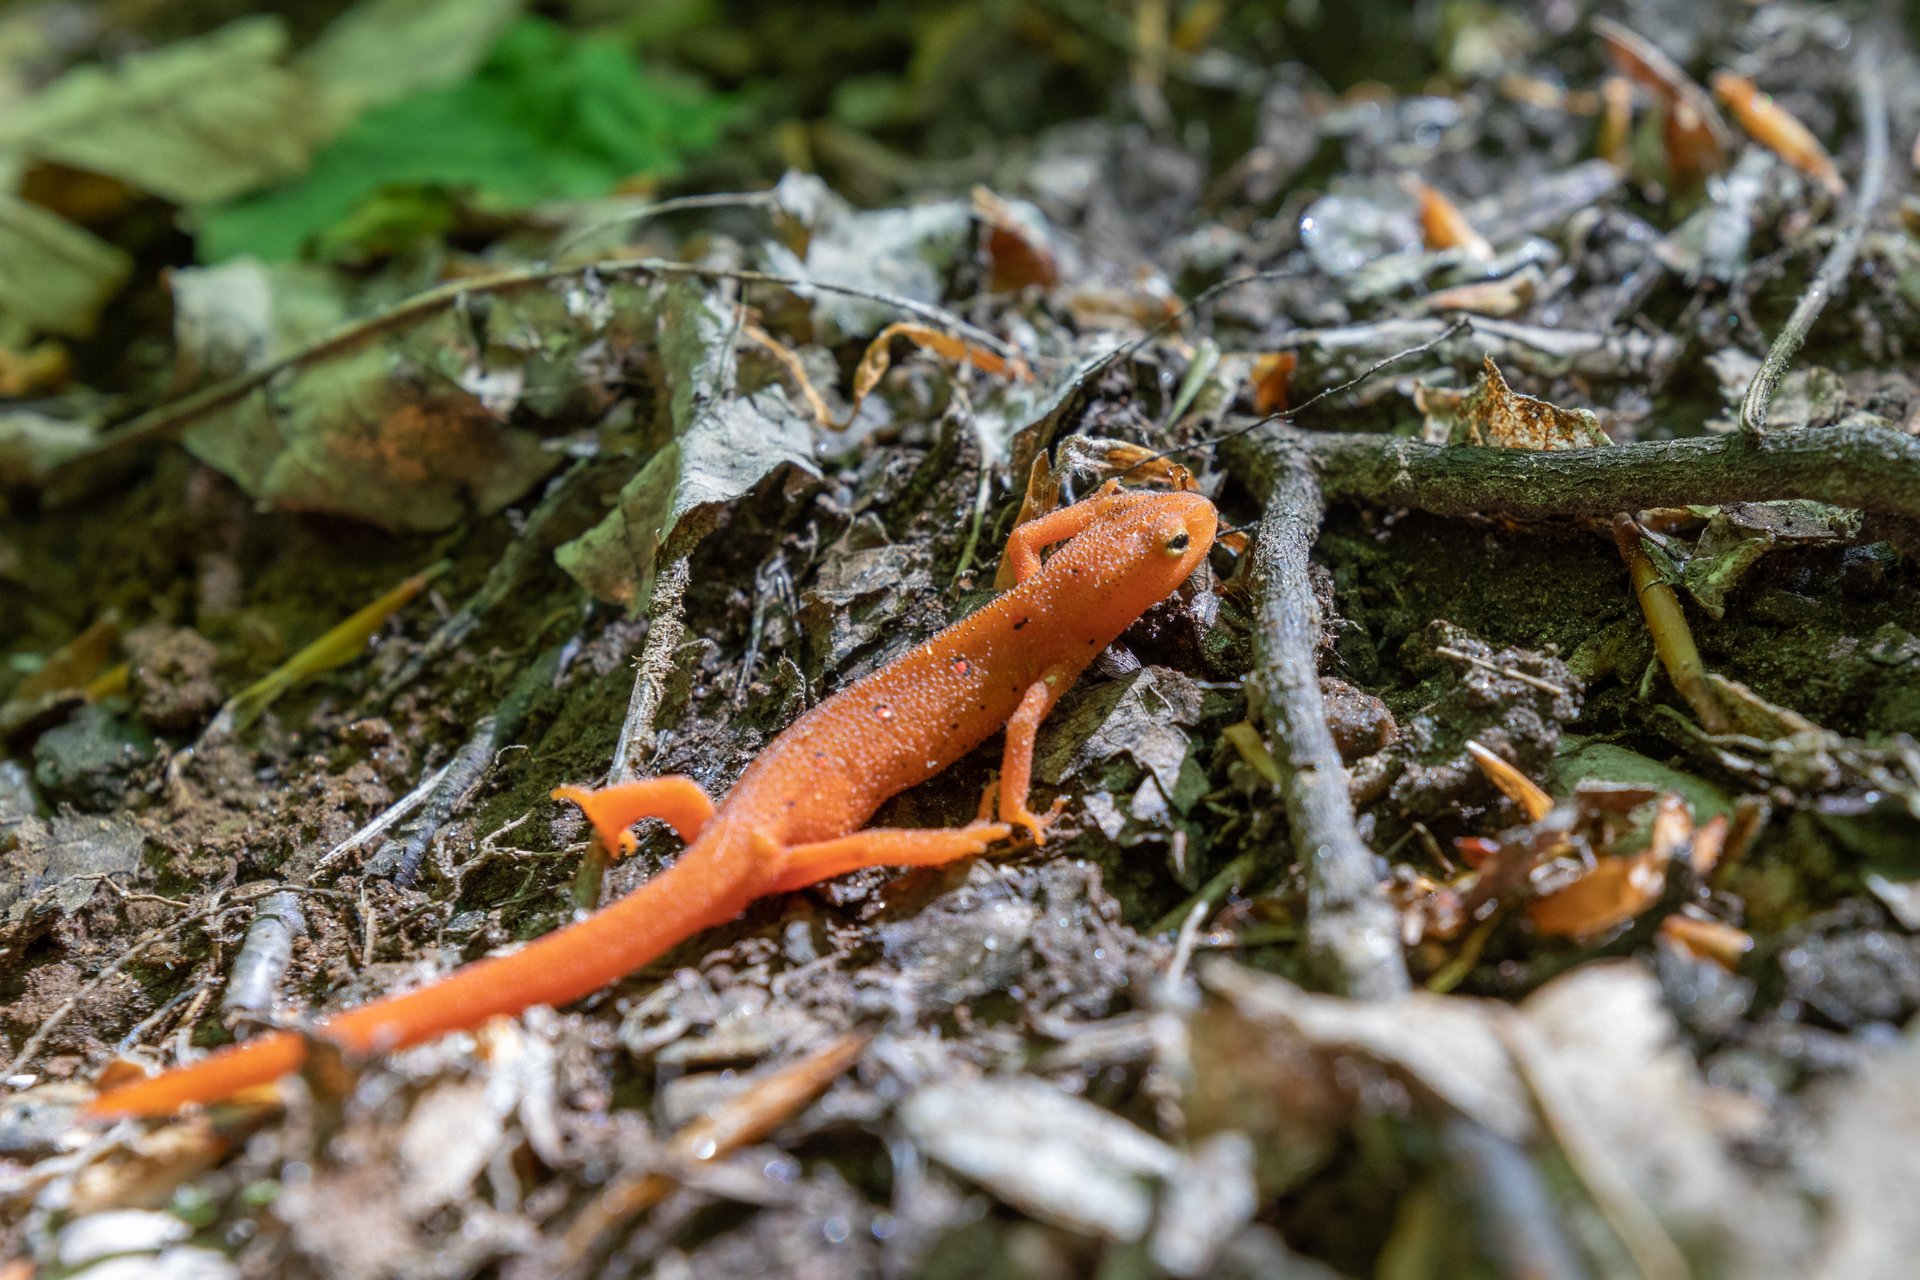 A bright orange Red Eft climbing over twigs and dirt.